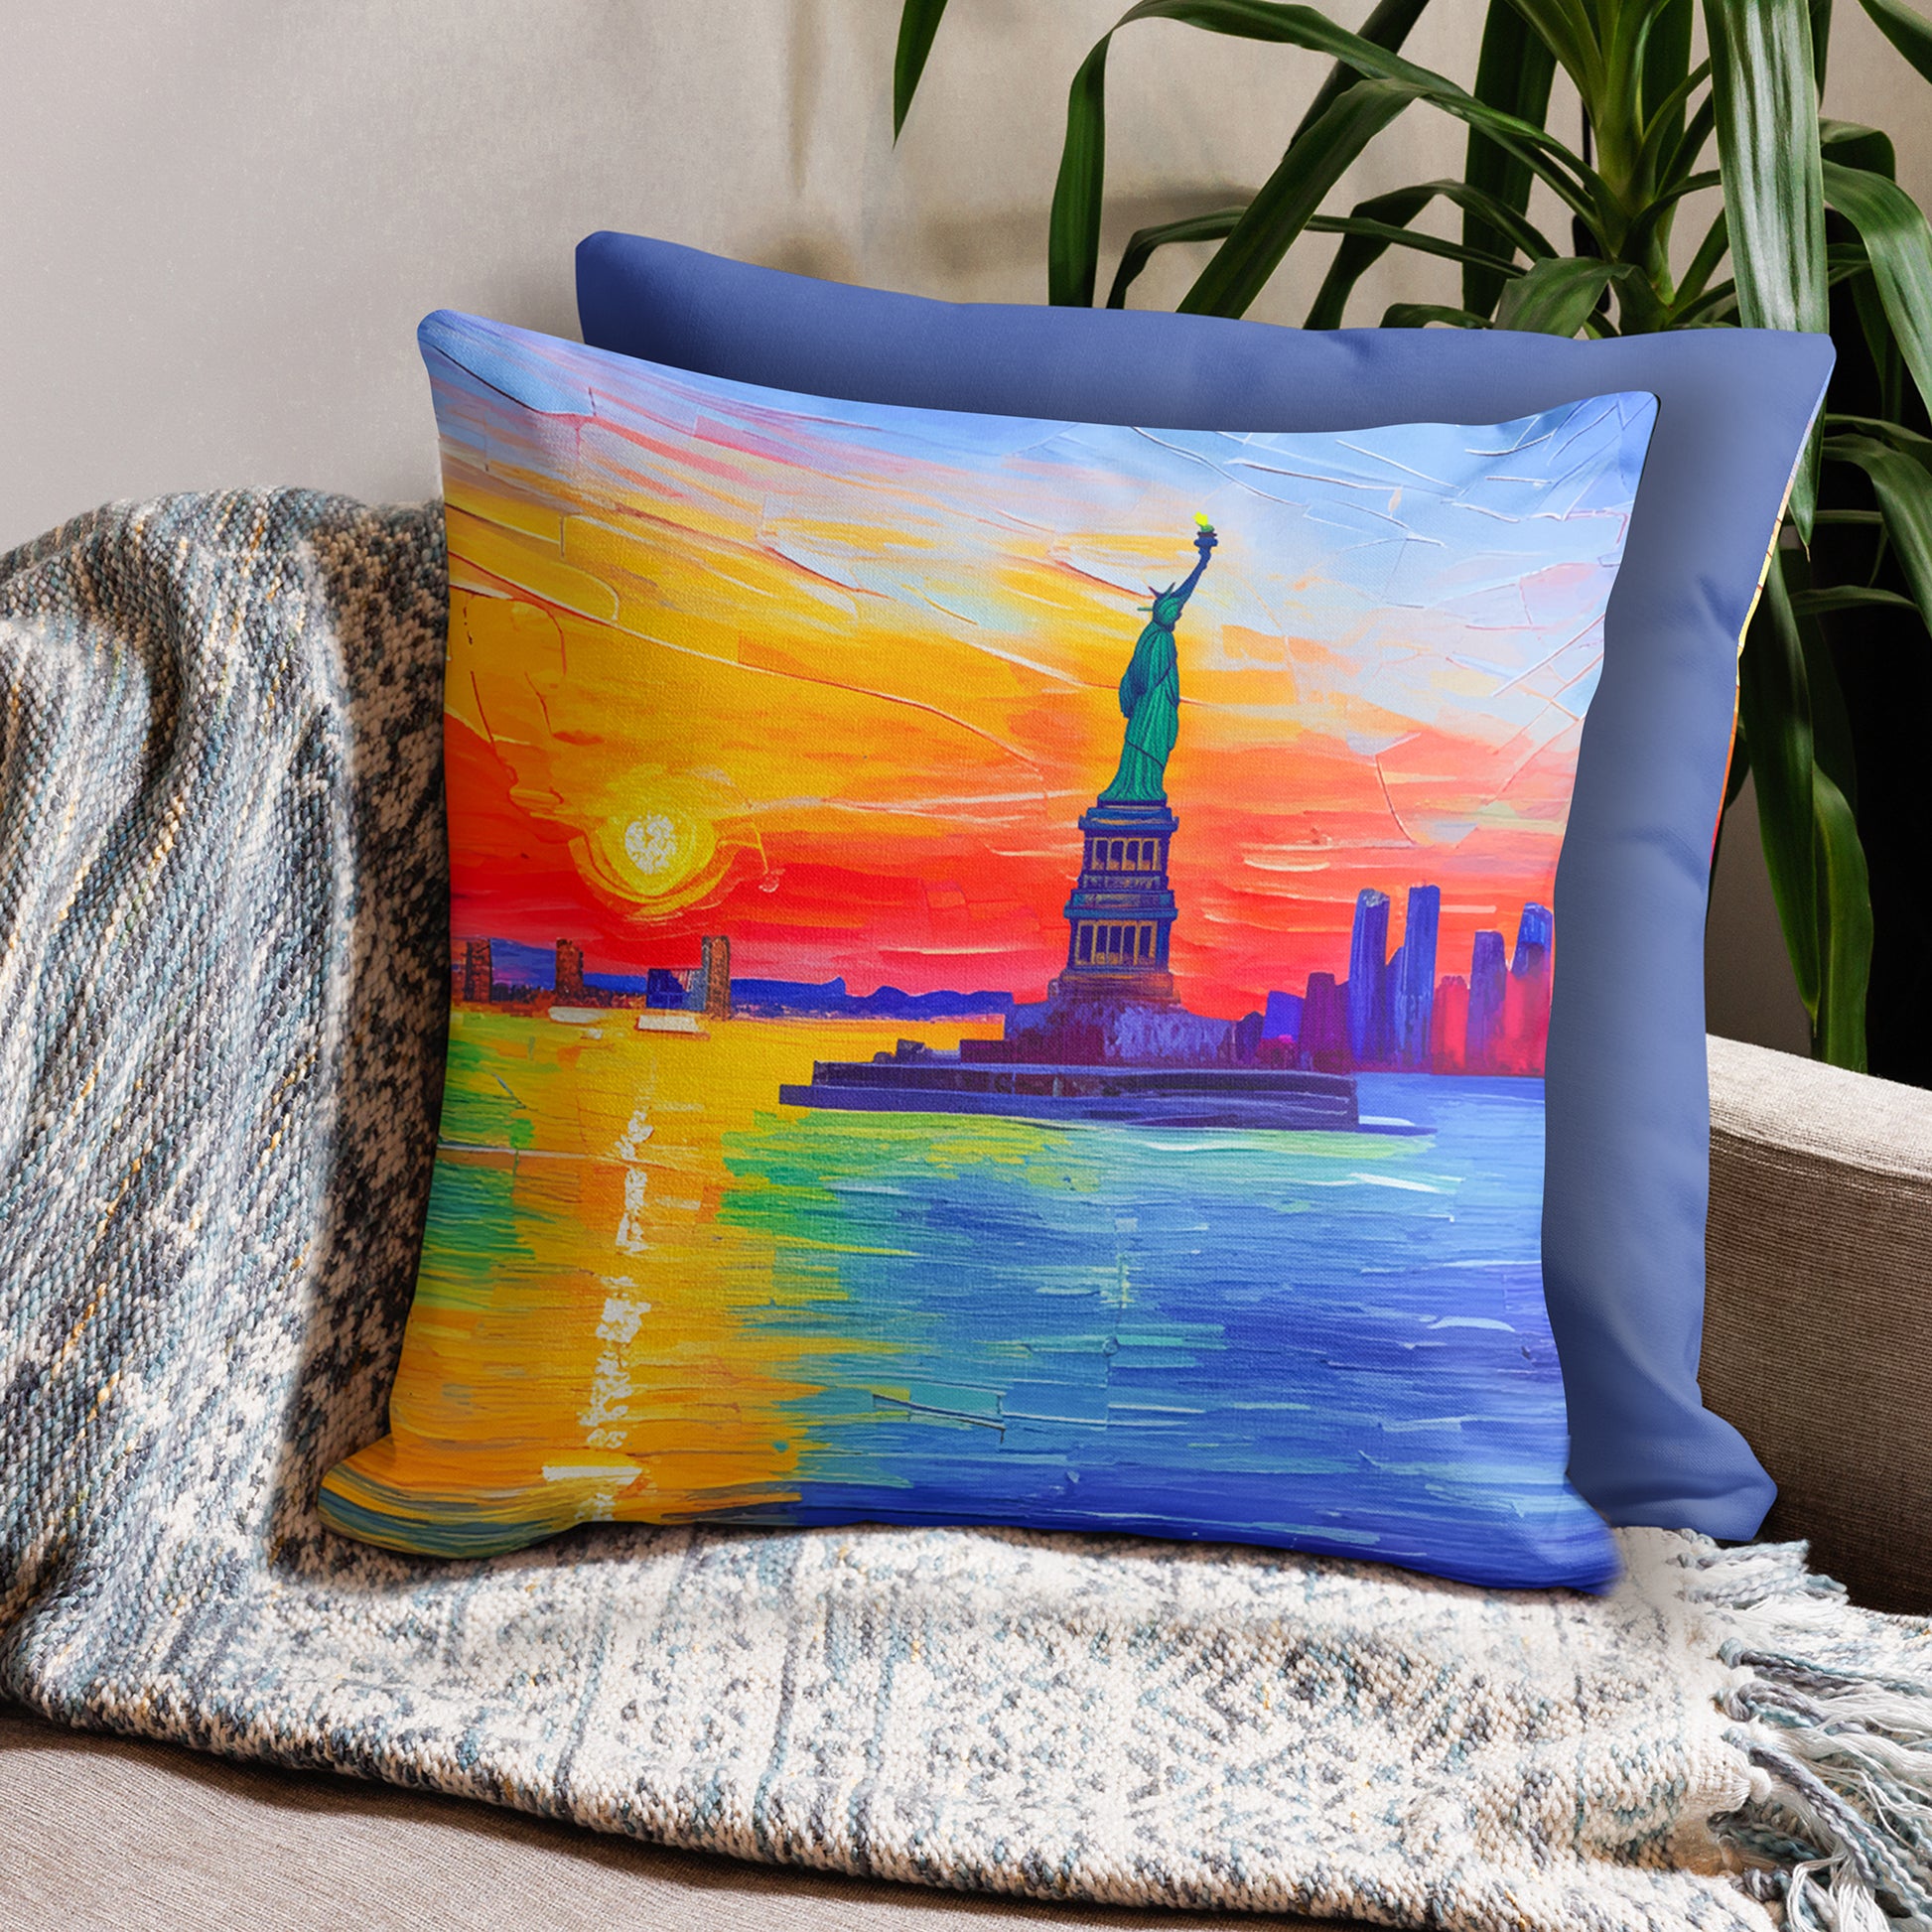 Premium Throw Pillow - New York | Add a pop of color and cozy texture to any space | Seepu